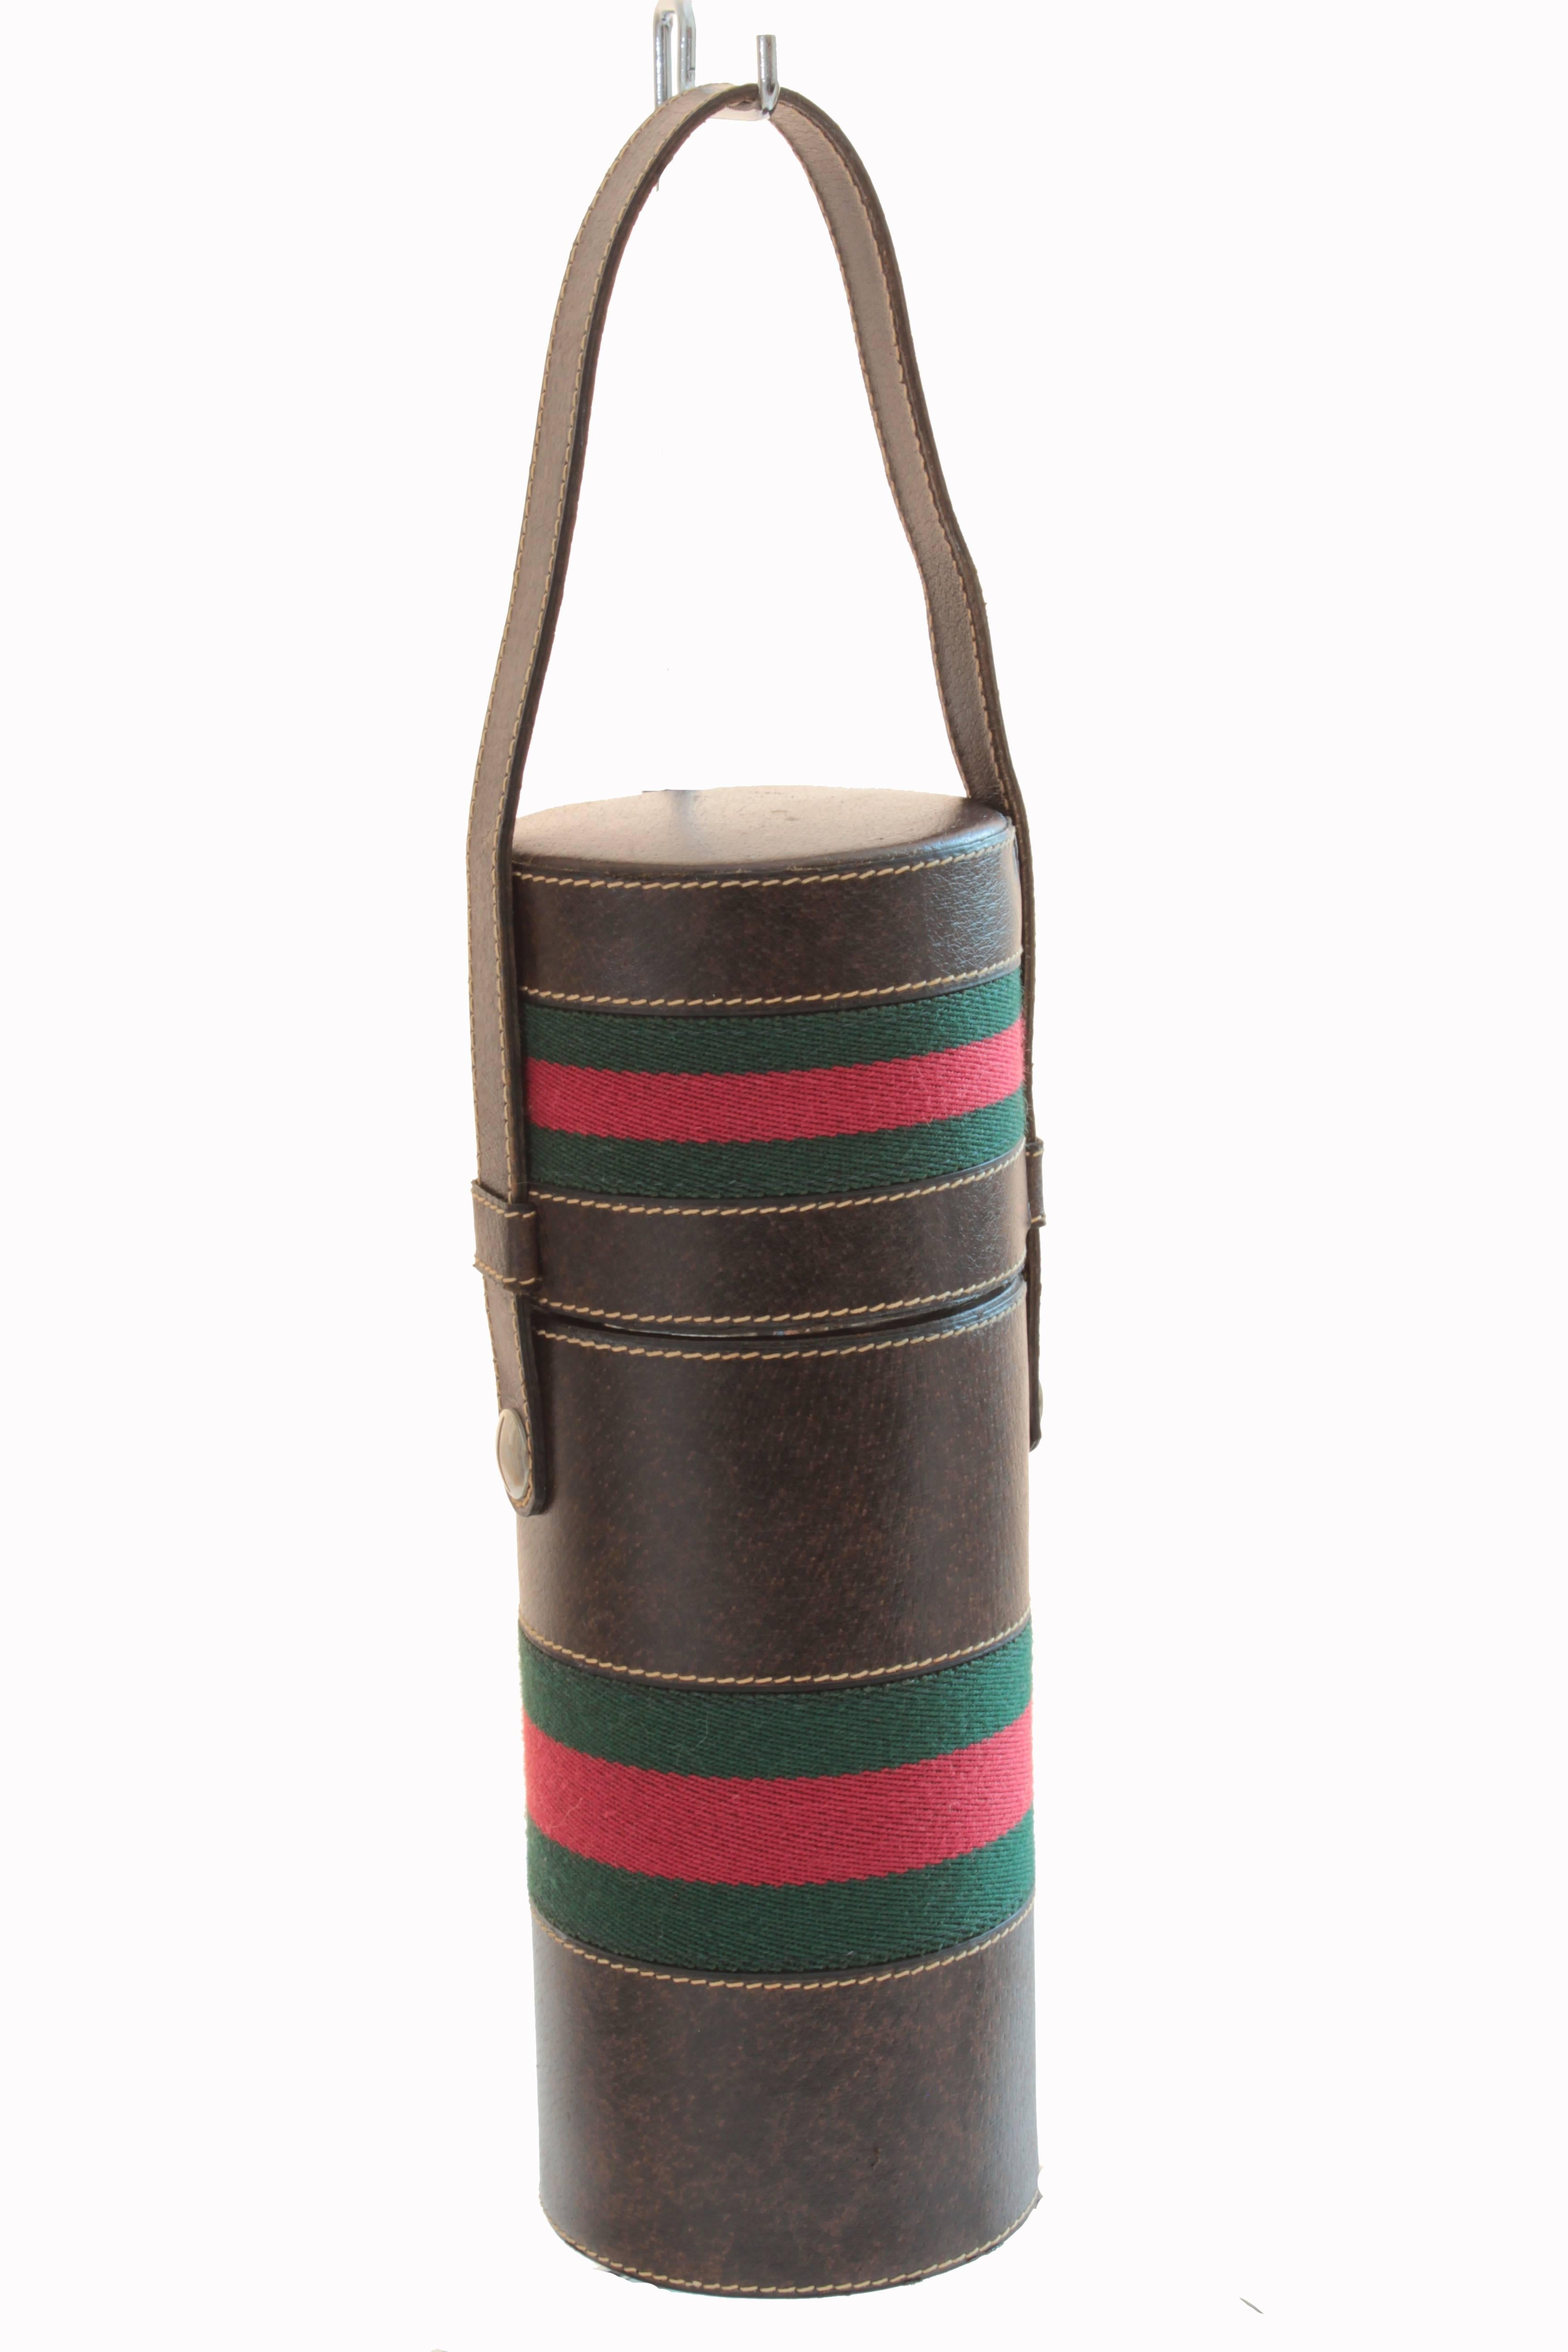 This ultra rare thermos cover tote was made by Gucci, most likely in the early 1970s.  Made from brown leather, it features Gucci's iconic red and green webbing and opens to reveal a steel flask with glass thermos bottle and cup.  In excellent